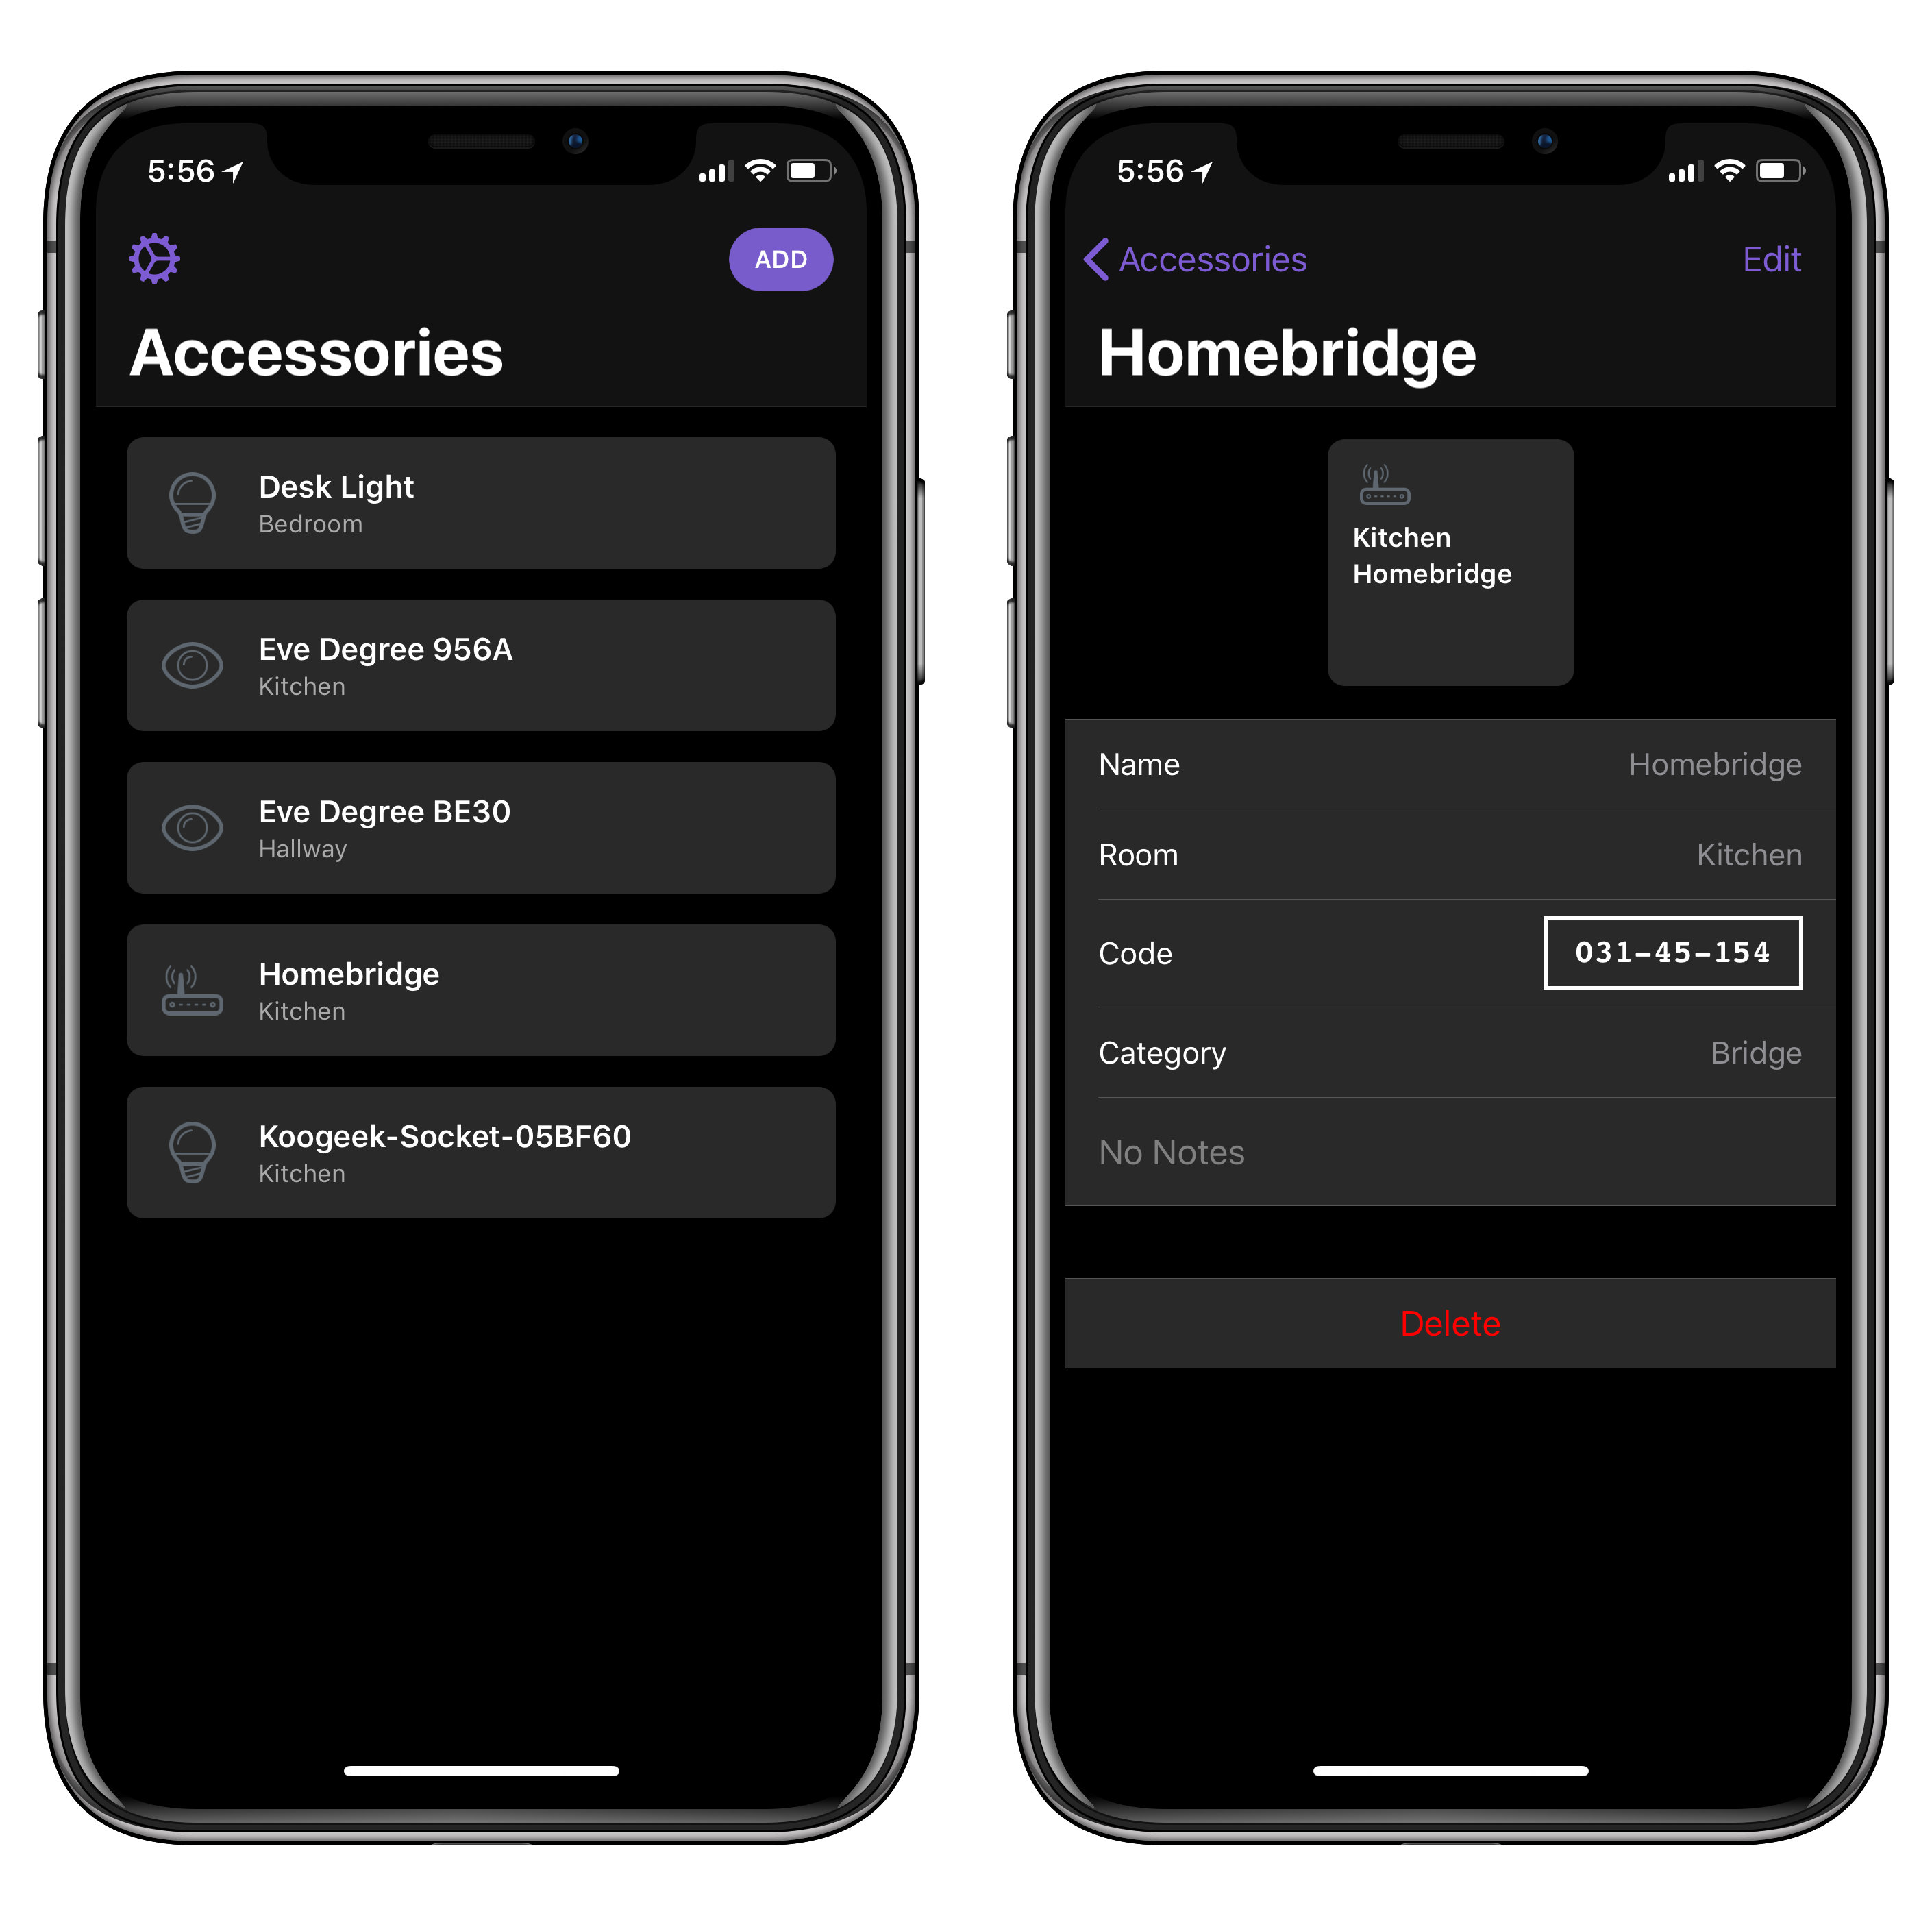 Federico Viticci på Twitter: "If you own several HomeKit accessories, I highly recommend by @aaron_pearce to store all your setup codes. Very clever utility. https://t.co/SJxoDOzTQi https://t.co/gKUlvWRkAc" / Twitter